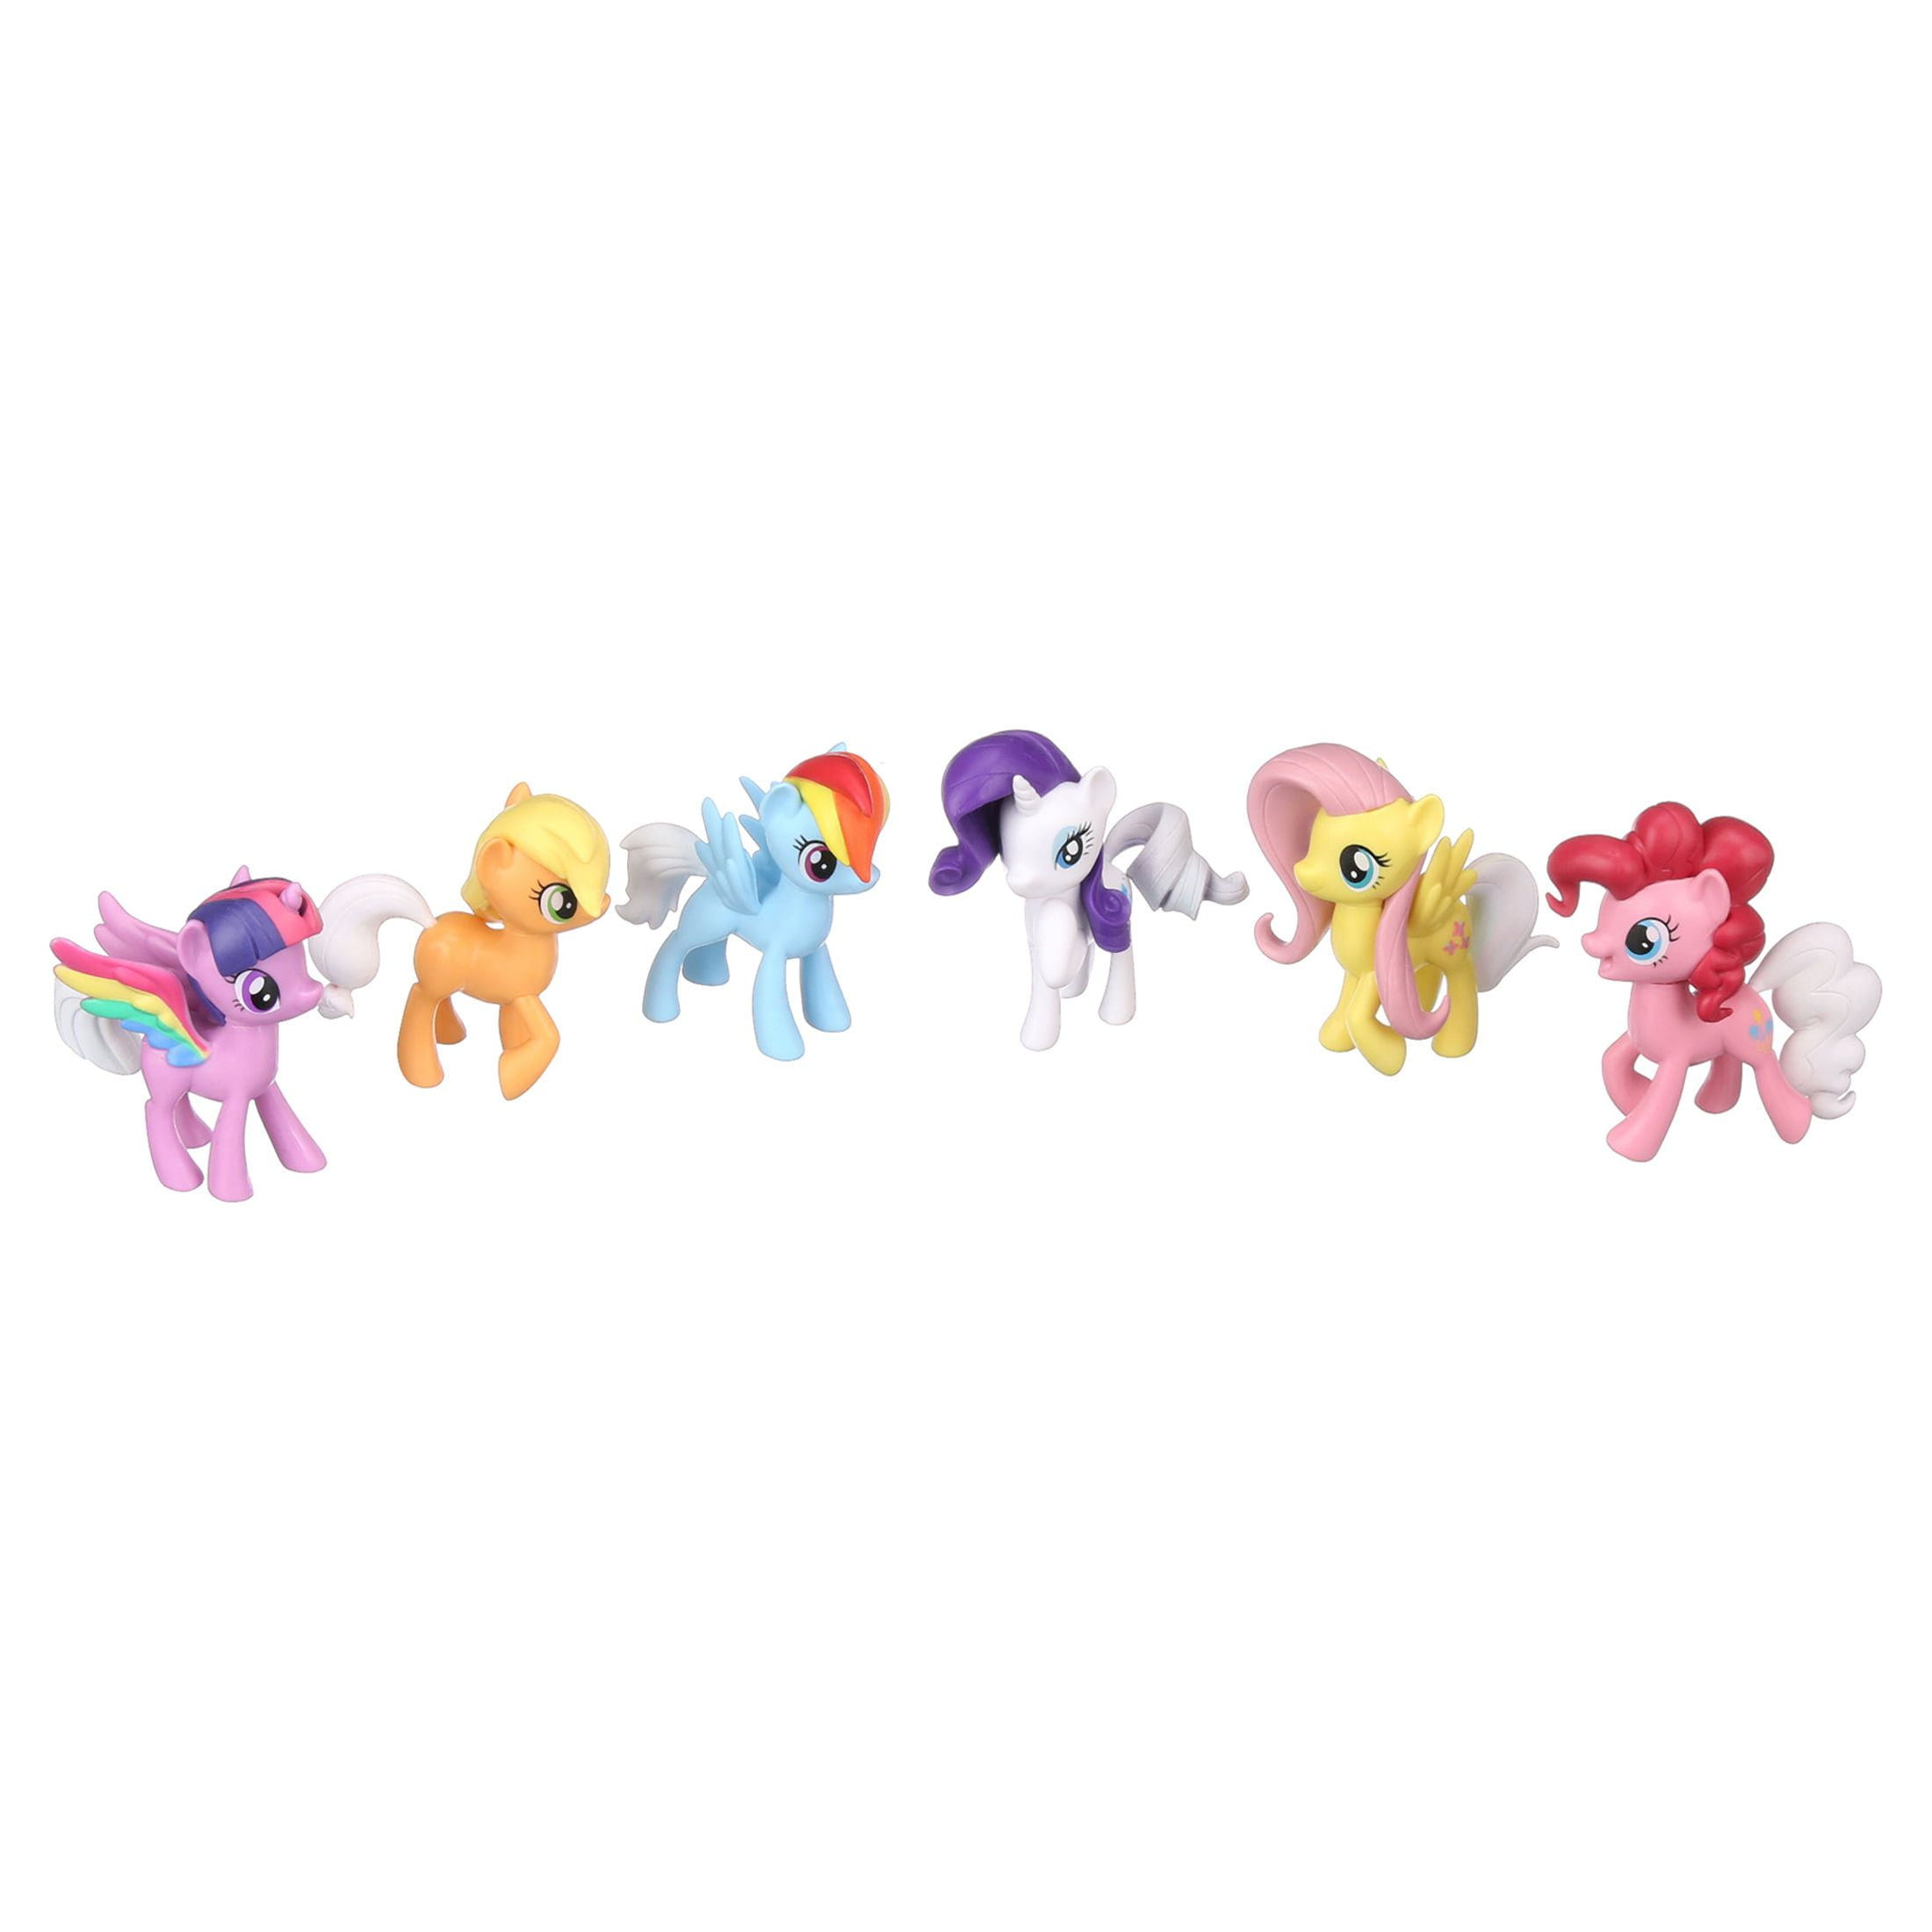  My Little Pony Toy Rainbow Tail Surprise - Collection Pack of 6  3 Pony Figures with Color-Change Features, Kids Ages 3 Years Old & Up :  Toys & Games